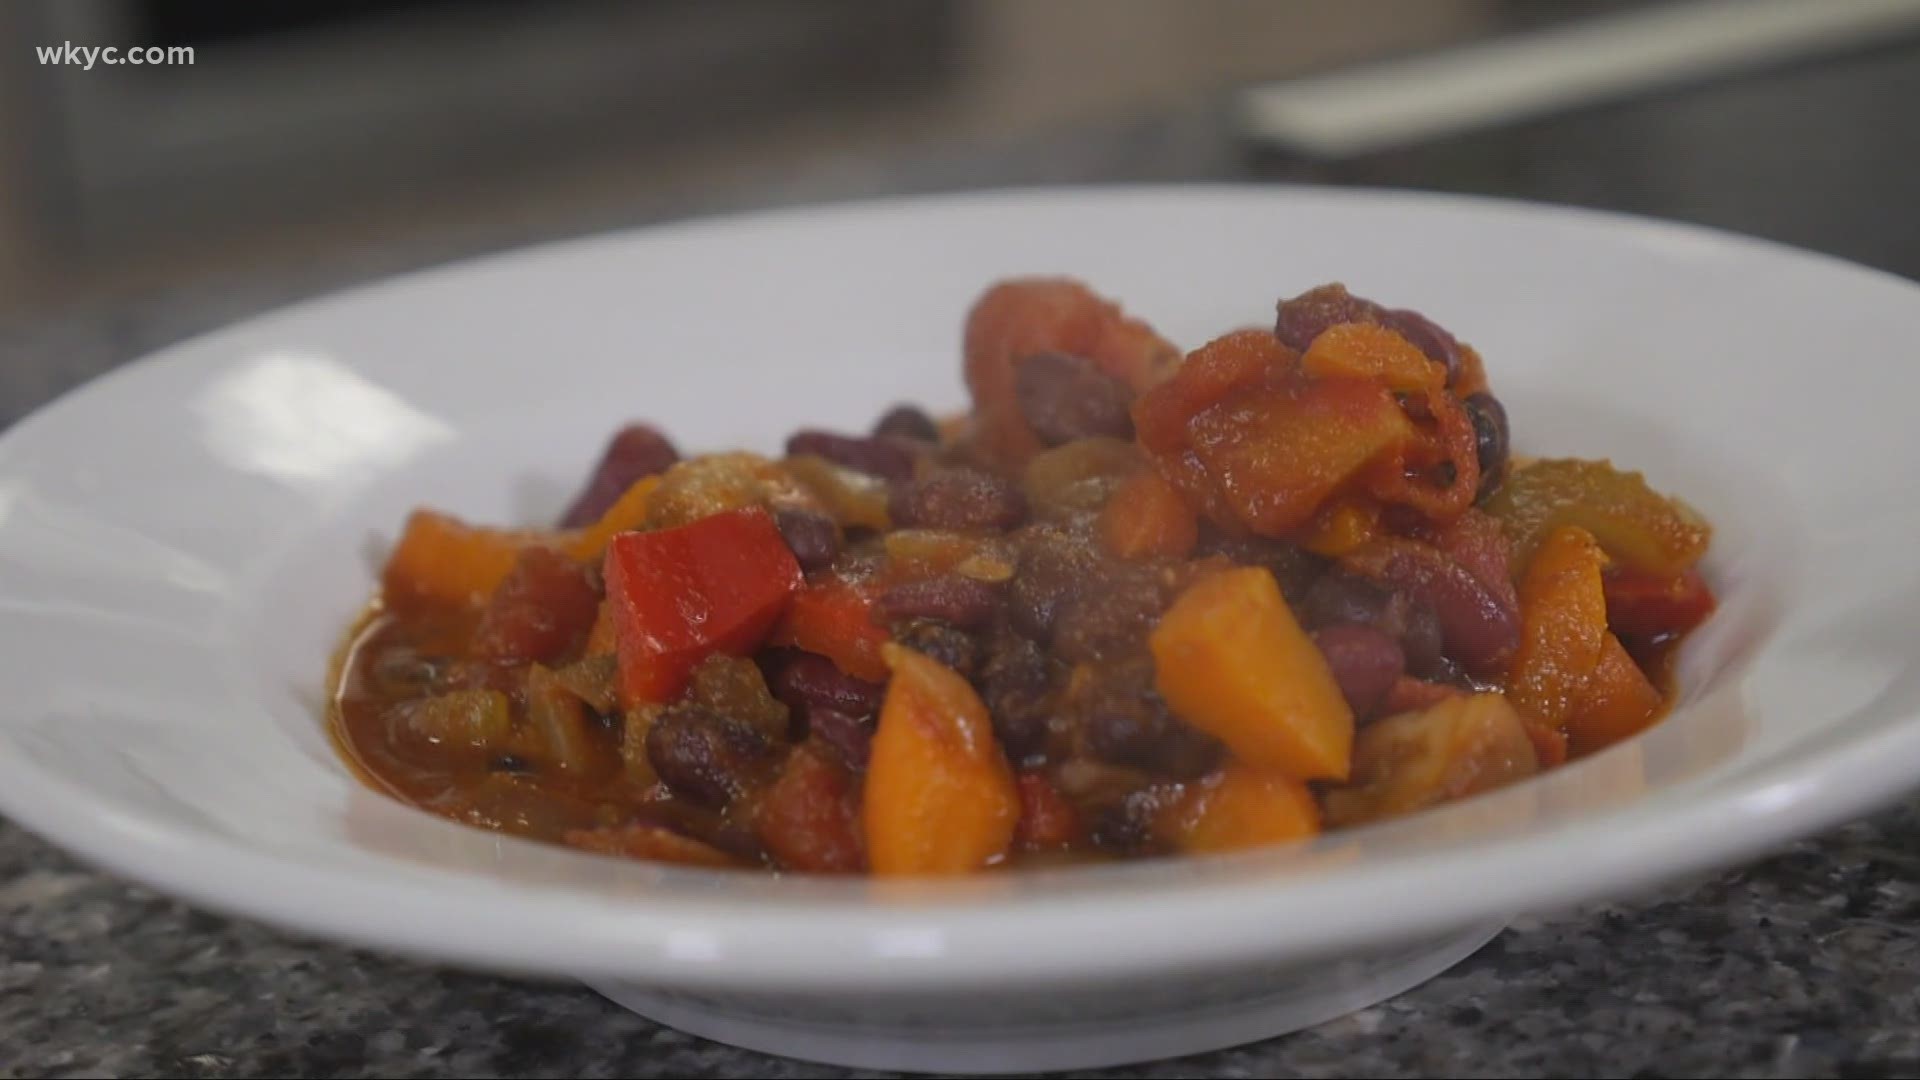 Feb. 26, 2021: Looking for some good comfort food? Cleveland Central Kitchen is sharing this simple recipe for vegetarian chili.